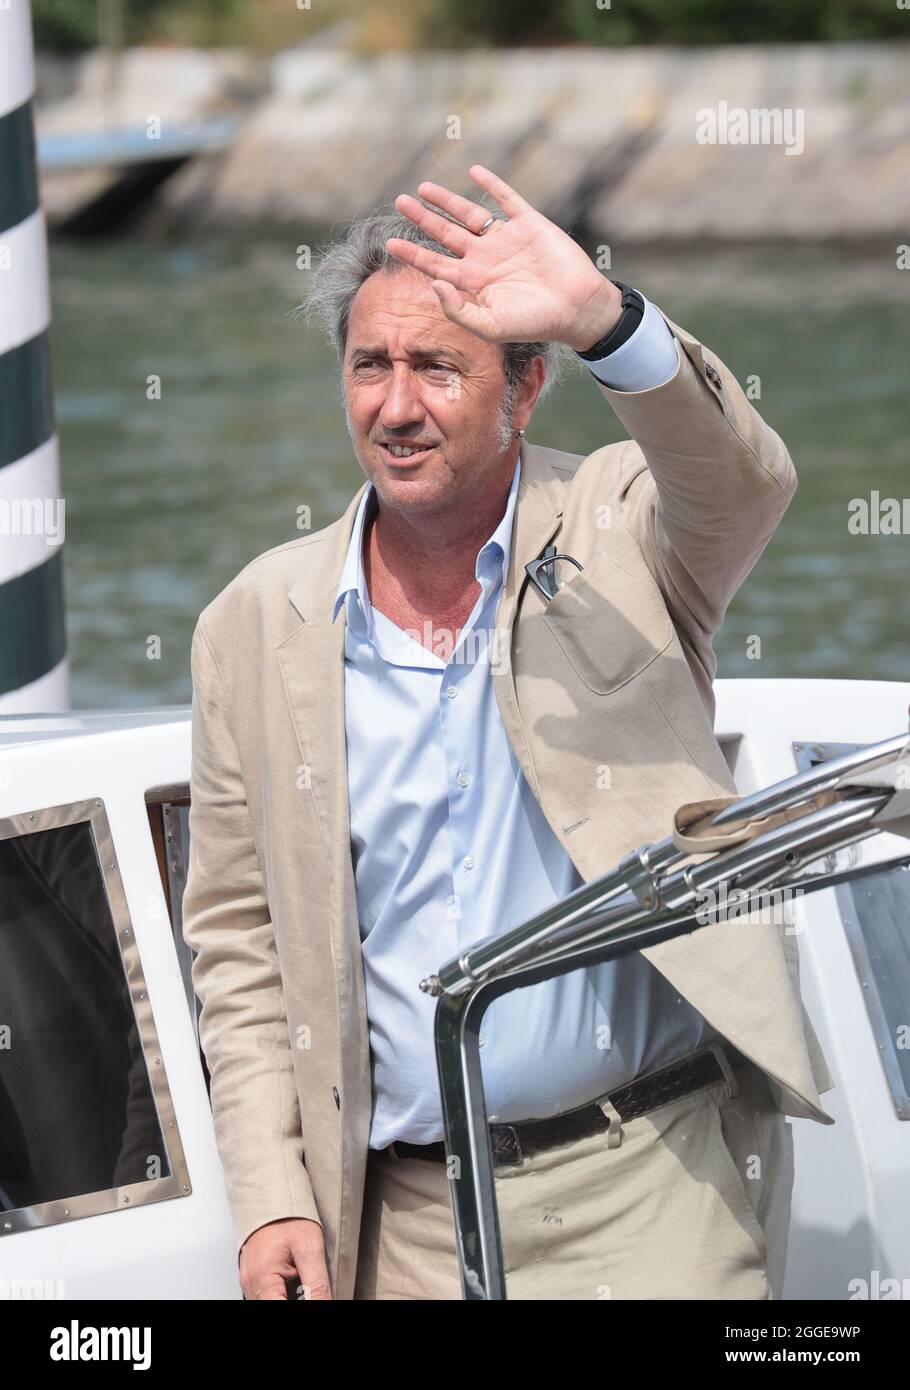 VENICE, ITALY - AUGUST 31: Director Paolo Sorrentino is seen arriving at the 78th Venice Film Festival at the Excelsior darsena on August 31, 2021 in Venice, Italy Stock Photo